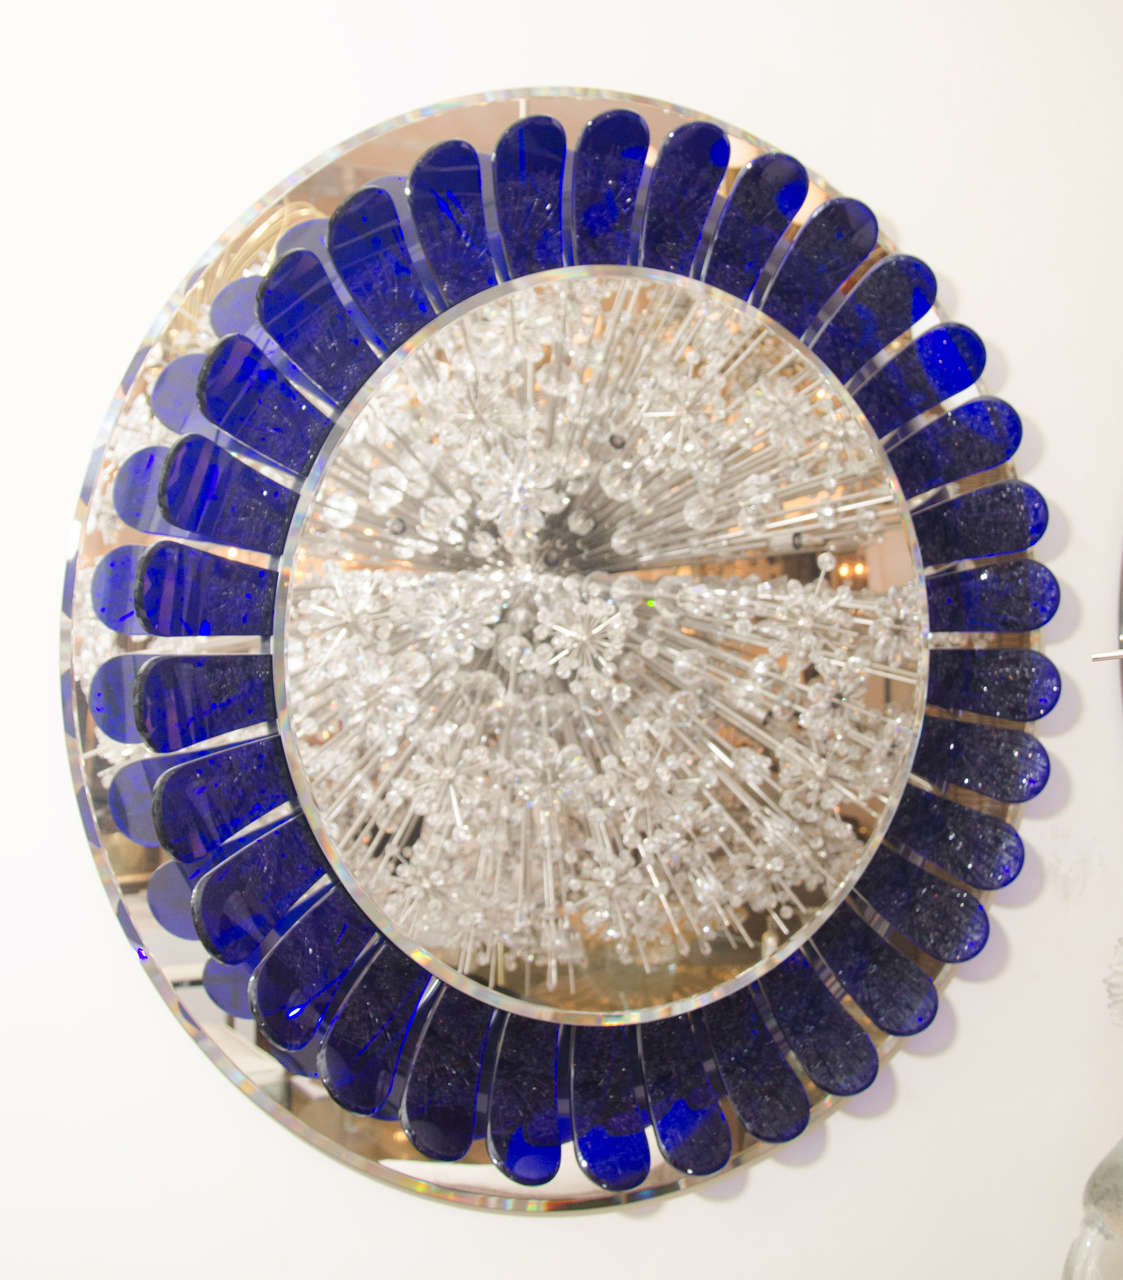 Large circular flower form mirror with curved cobalt blue glass element surround.

View our complete collection at www.johnsalibello.com